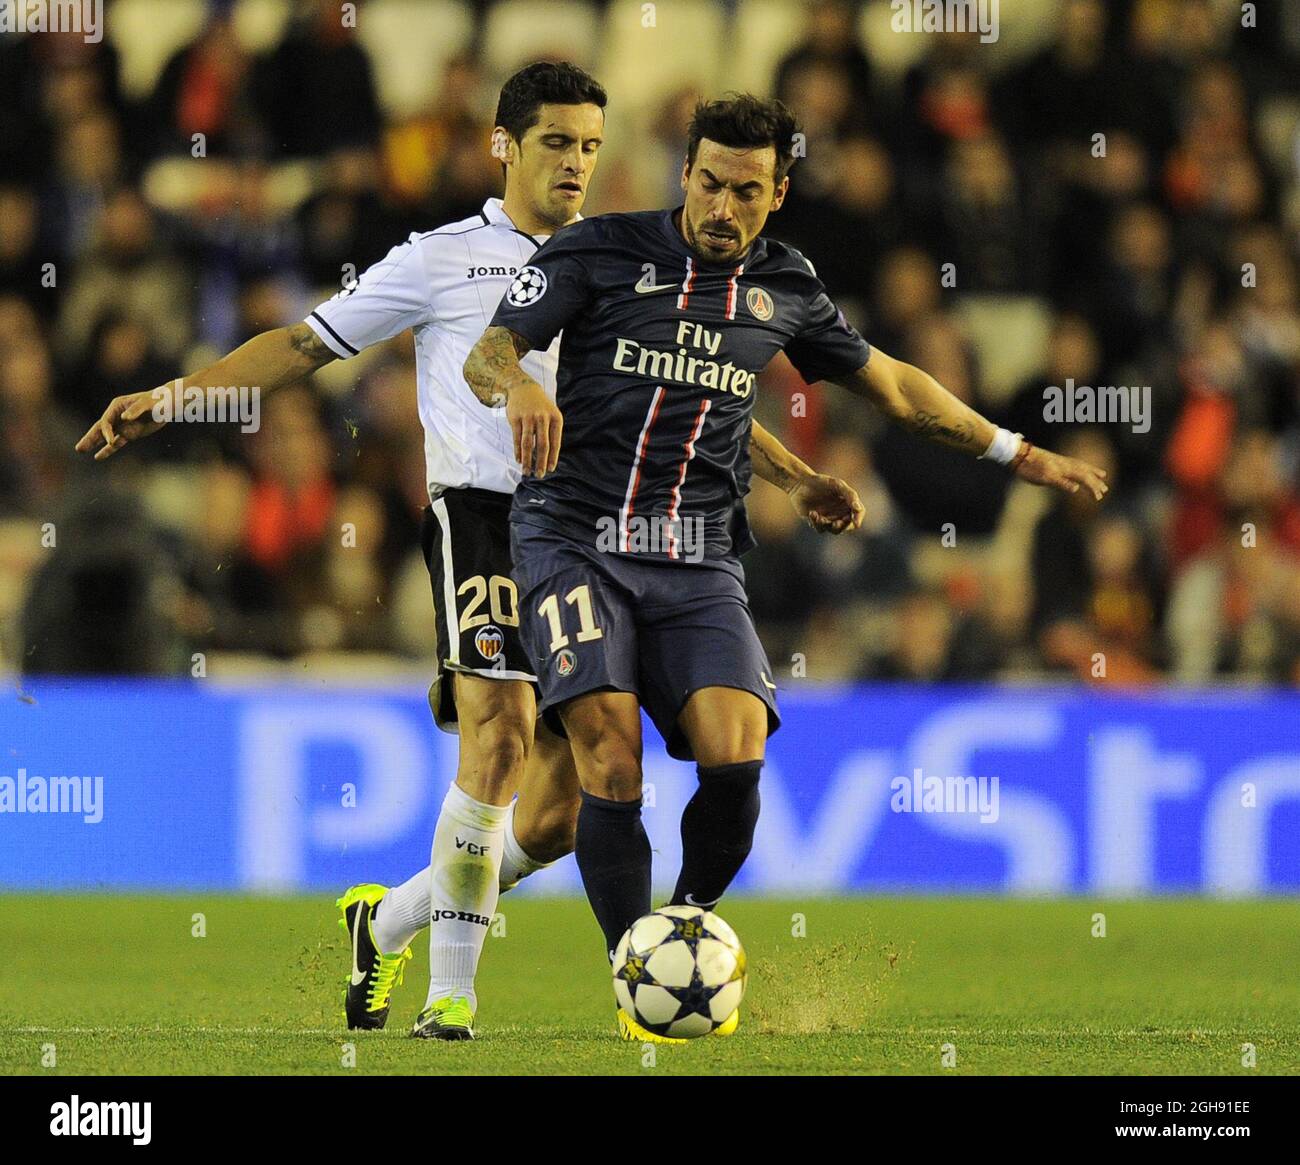 Ezequiel Lavezzi of Paris Saint Germain tussles with Ricardo Costa of Valencia during the UEFA Champions League First Knockout Round of 16, first leg soccer match between Valencia and Paris Saint-Germain at the Mestalla Stadium in Valencia, Spain on February 12, 2013. CSMLandov Stock Photo